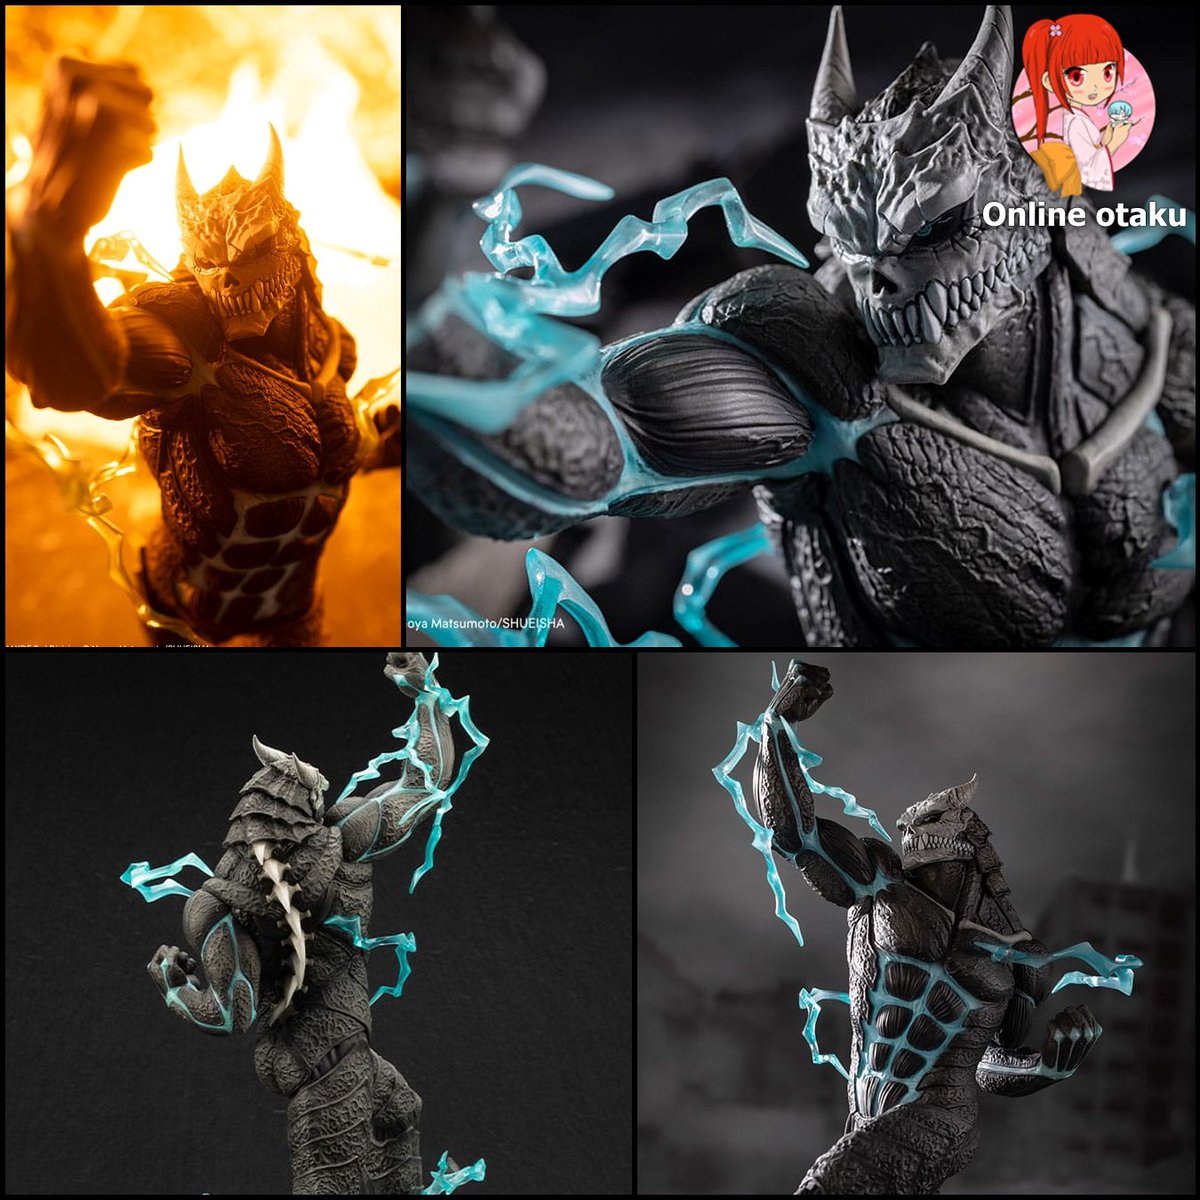 🦠 Unleash the power of Kaiju No. 8 with our ARTFXJ Statue! Order now and add this formidable figure to your collection: online-otaku.com/en/shop/item/2… #KaijuNo8 #ARTFXJ #OnlineOtaku #AnimeFigure #FigureCollection